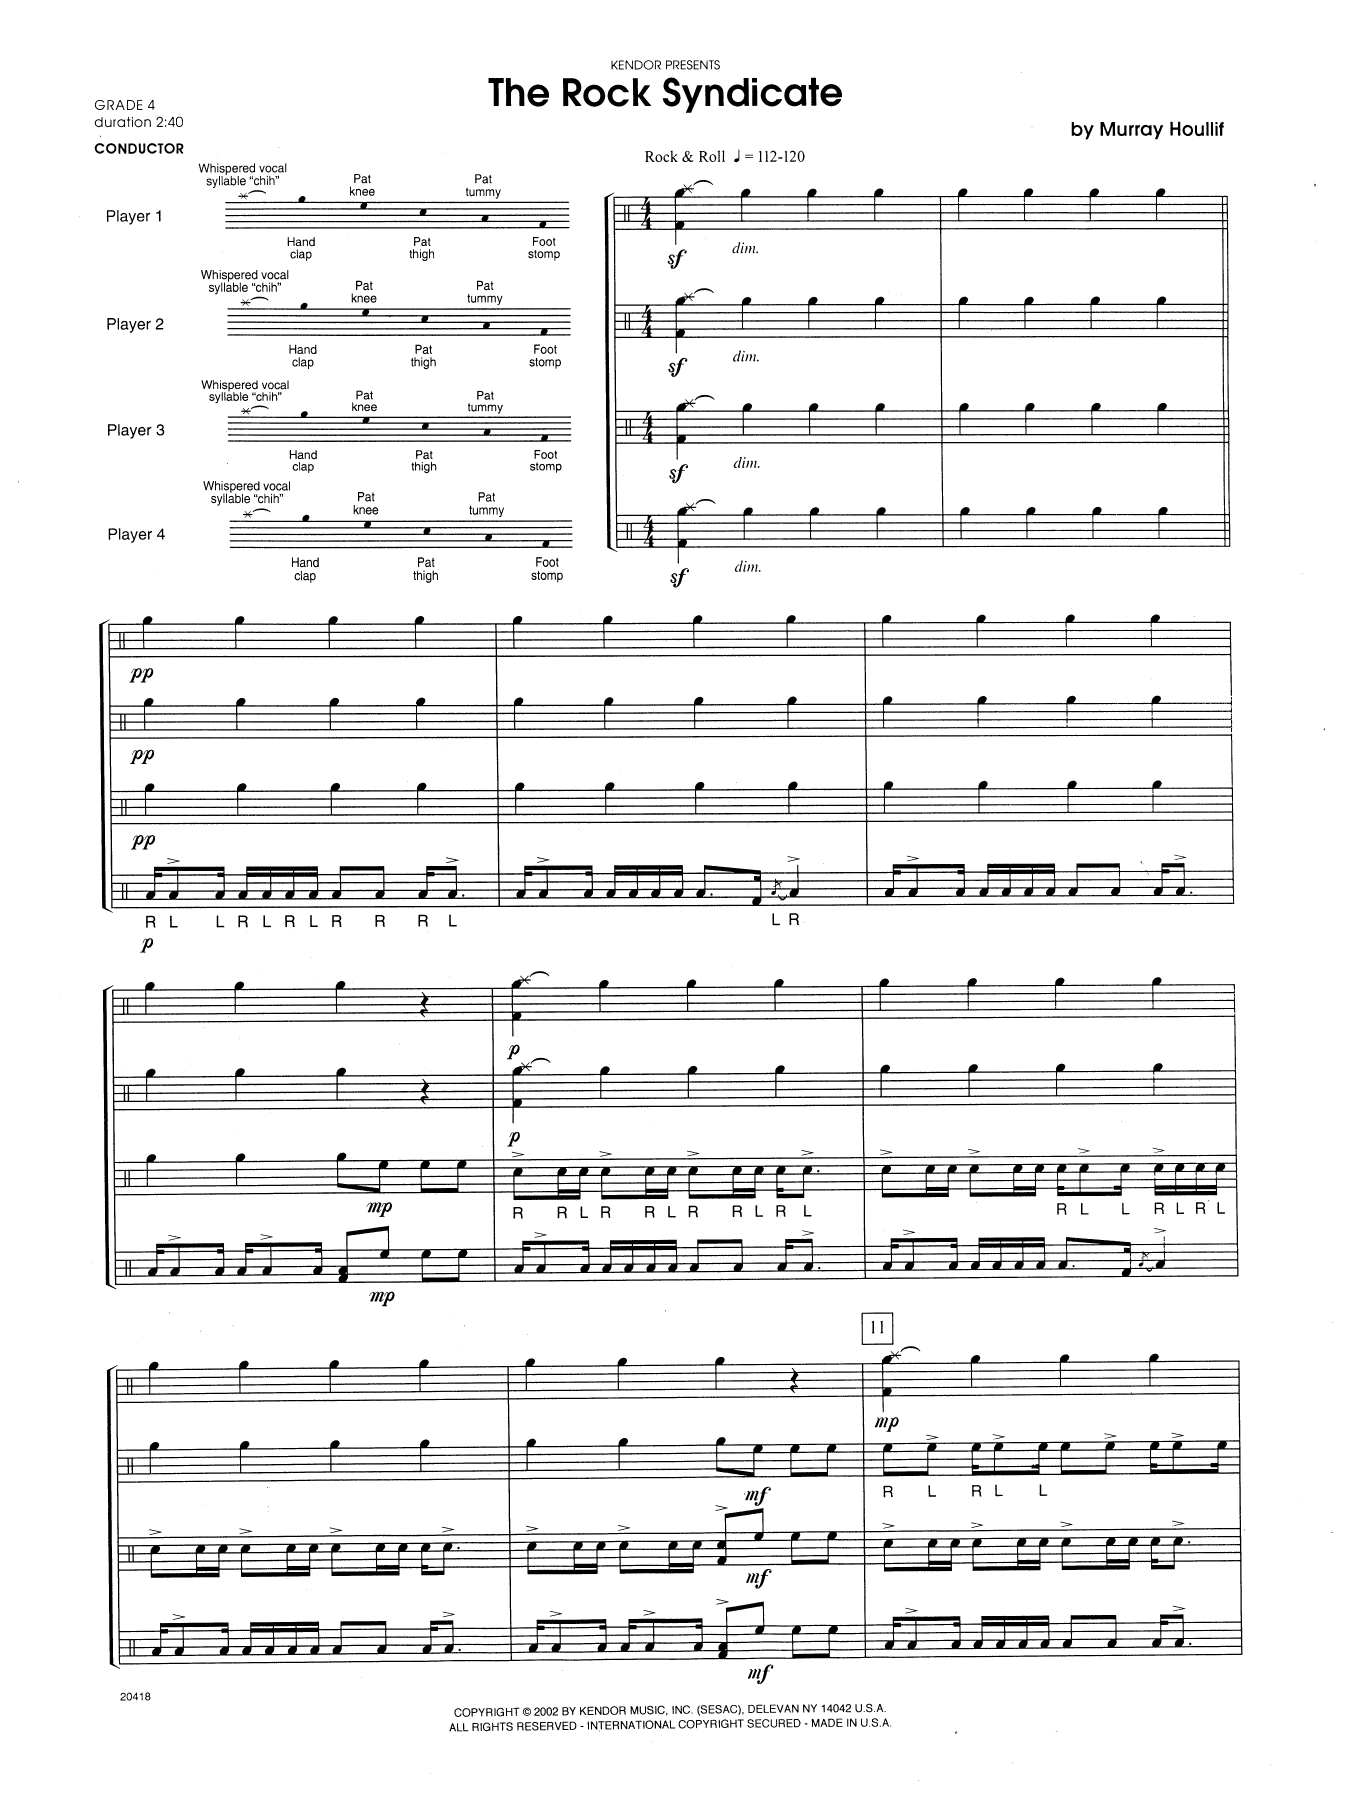 Download Murray Houllif The Rock Syndicate - Full Score Sheet Music